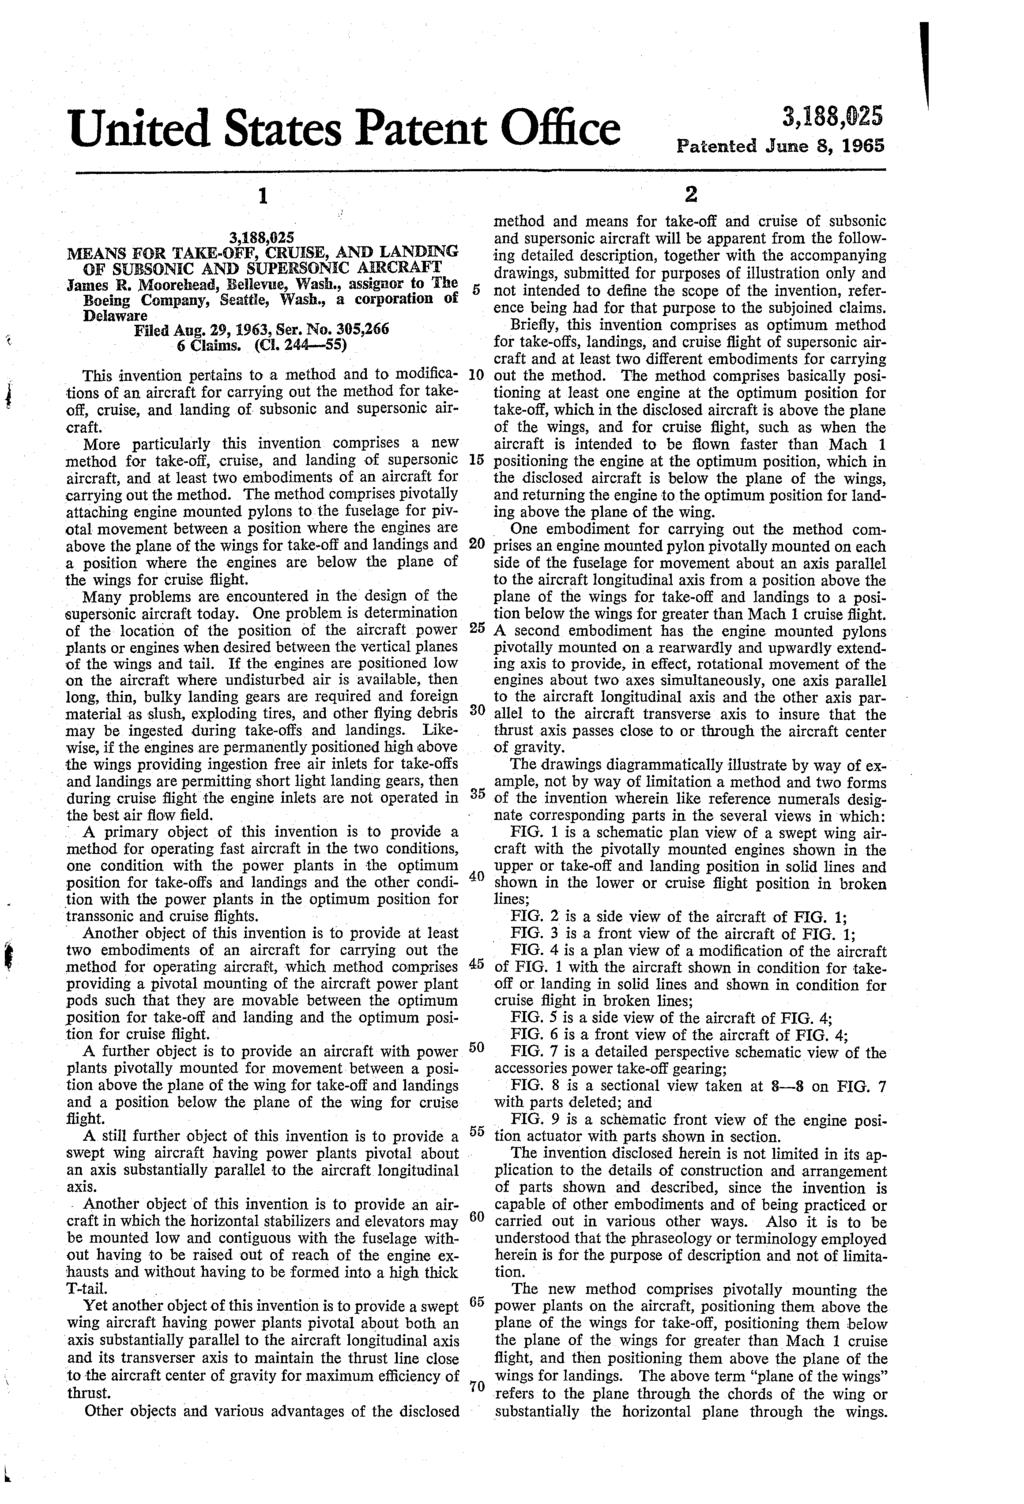 United States Patent Office Patiented June 8, 1965 1 MEANS FOR TAKE-OFF, CRUISE, AND LANDING OF SUBSONIC AND SUPERSONEC AIRCRAFT James Boeing R. Moorehead, Company, Seattle, Bellevue, Wash.